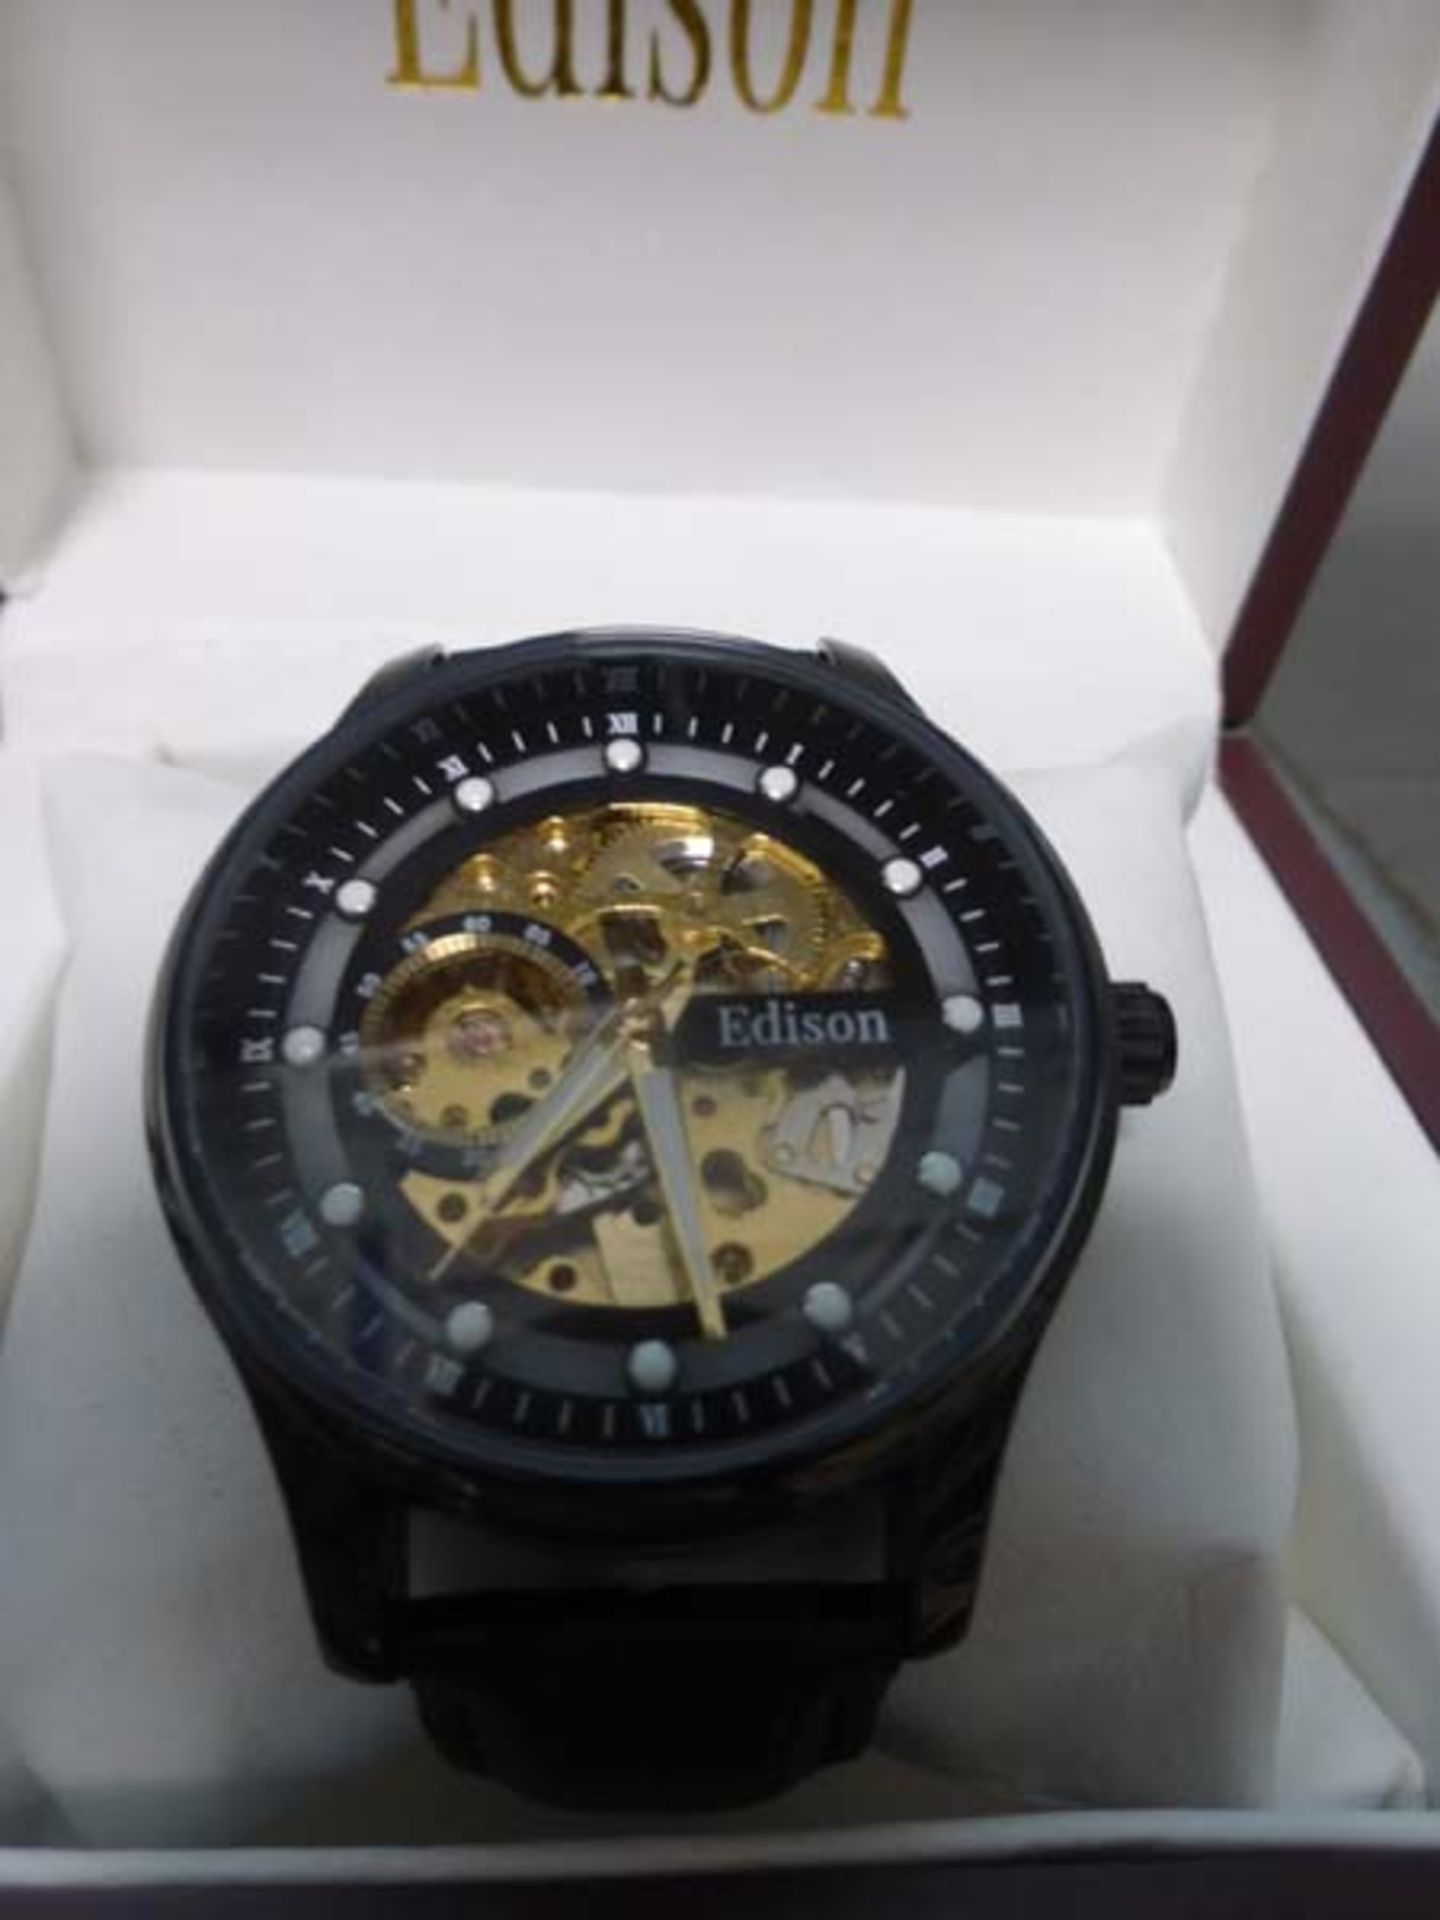 Gents open movement Edison automatic wristwatch with black leather strap in box